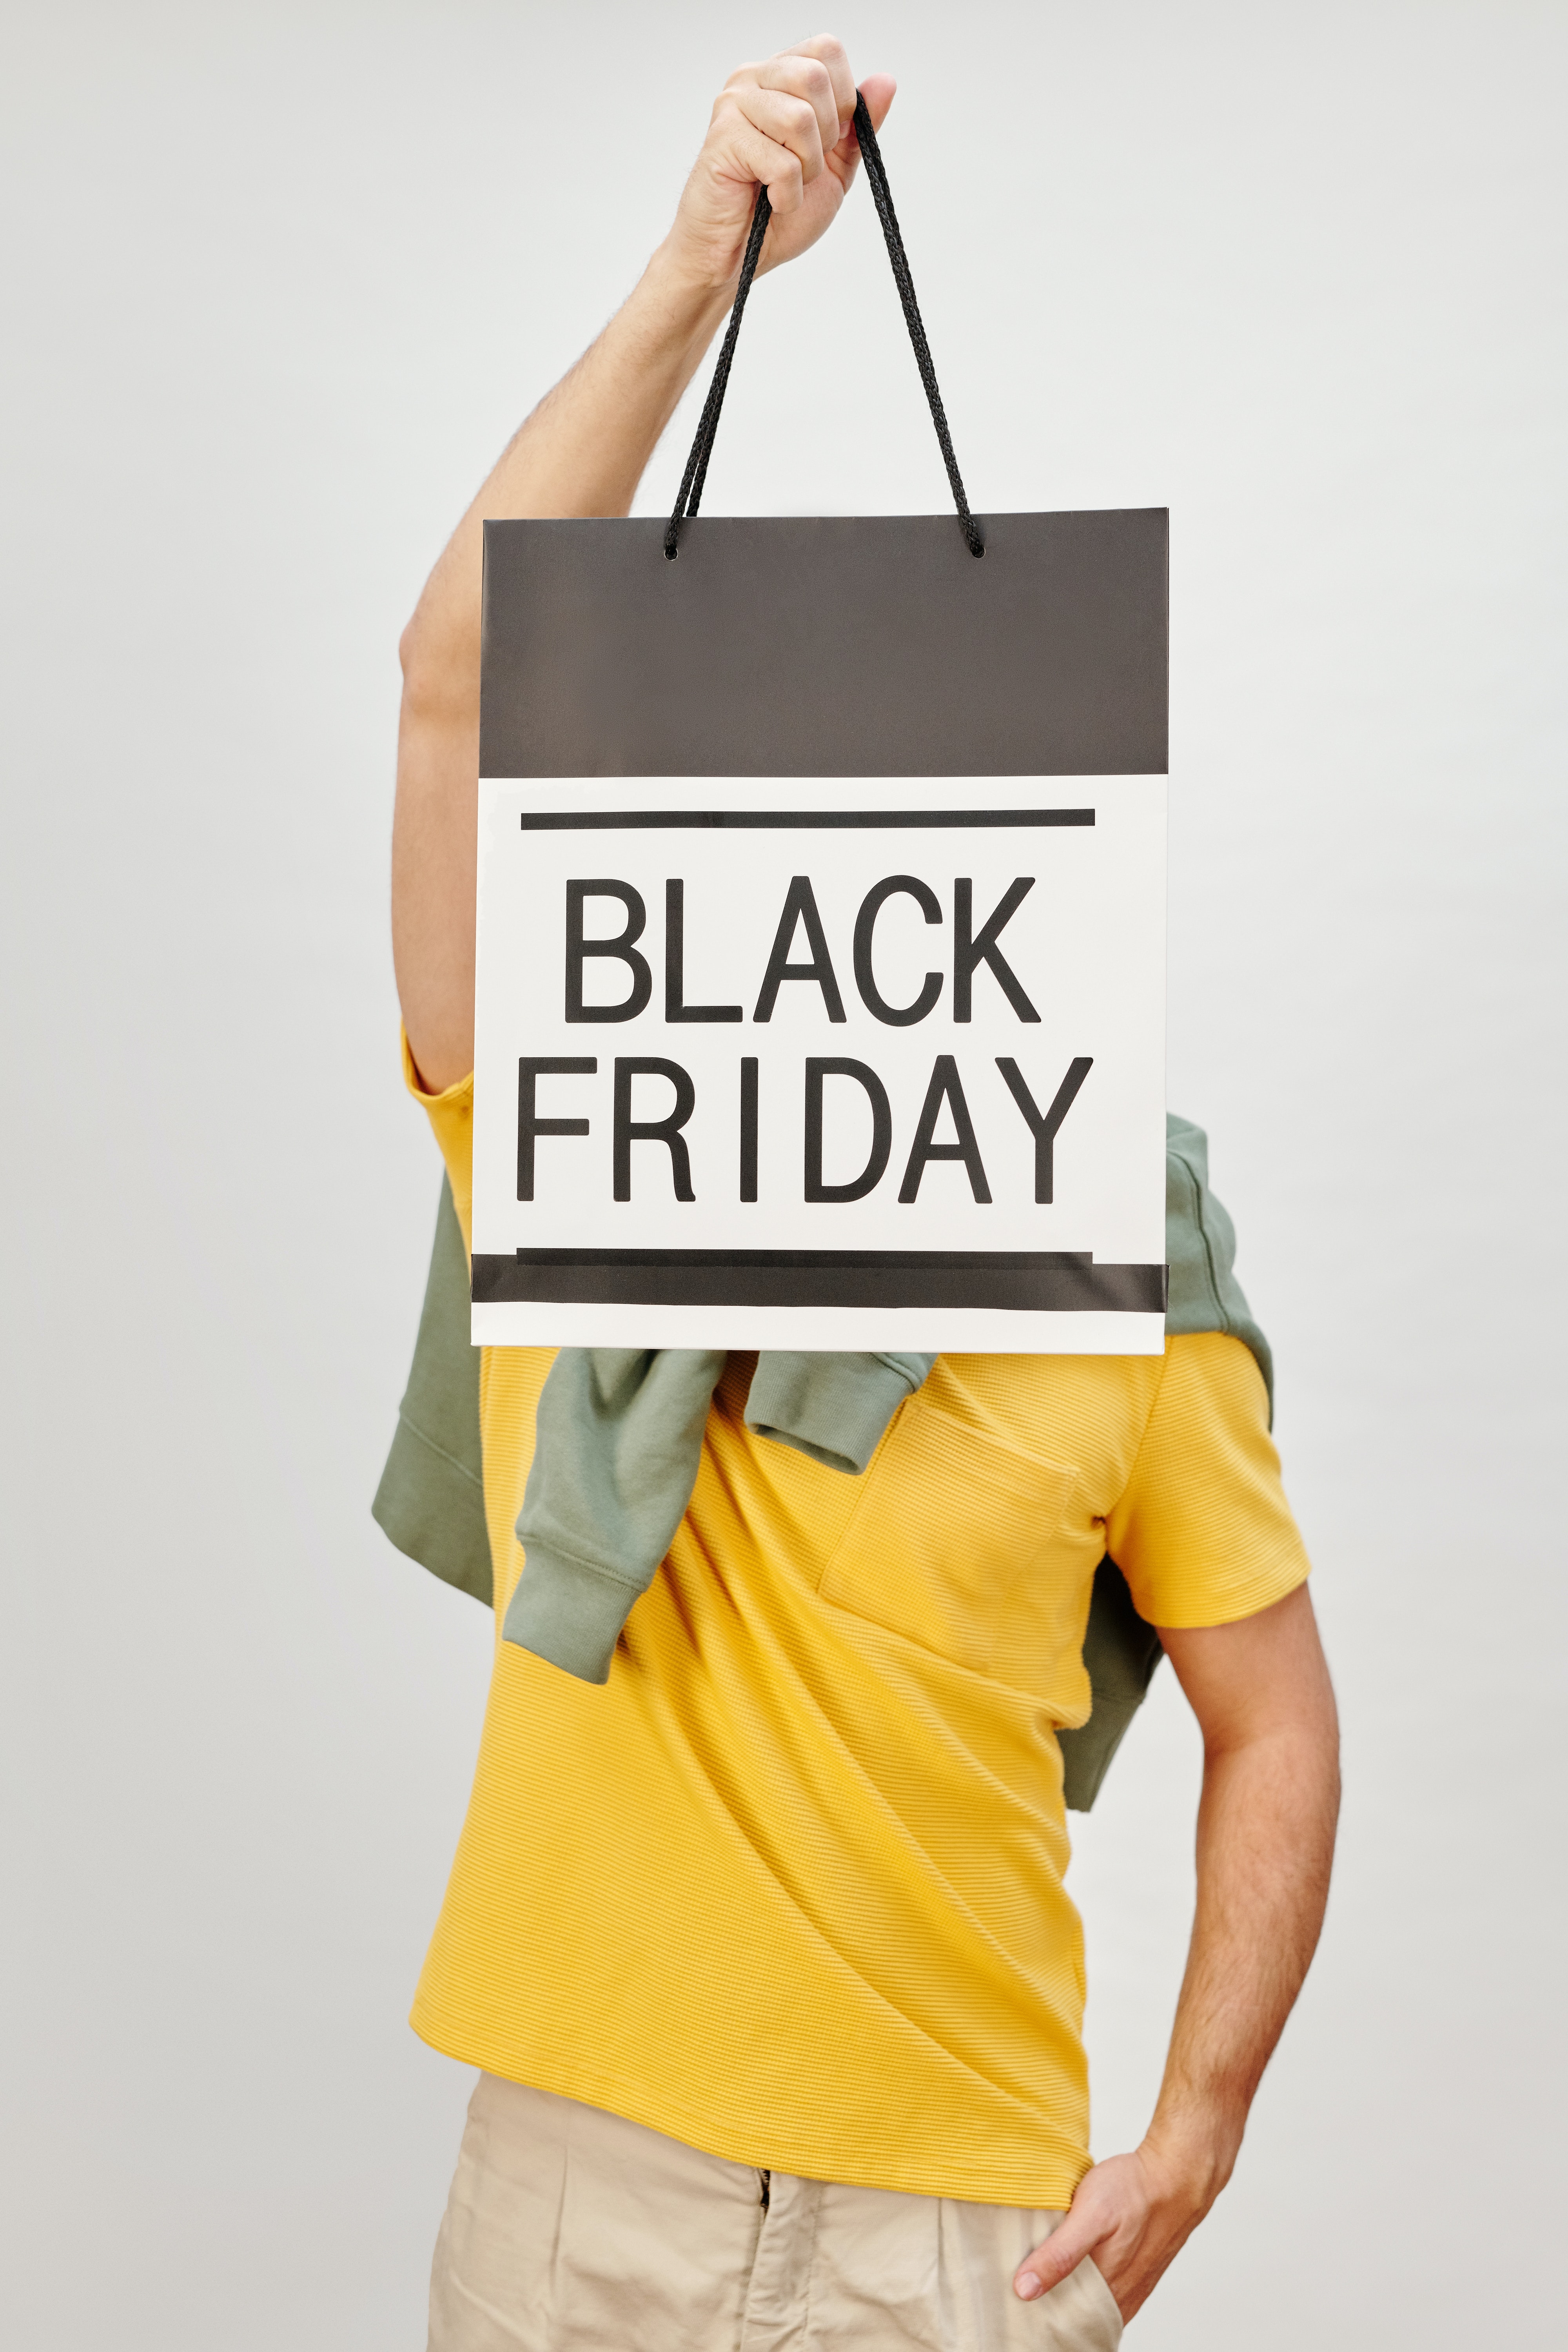 Black Friday & Cyber Monday Digital Marketing Checklist: Is Your Business Prepared? 